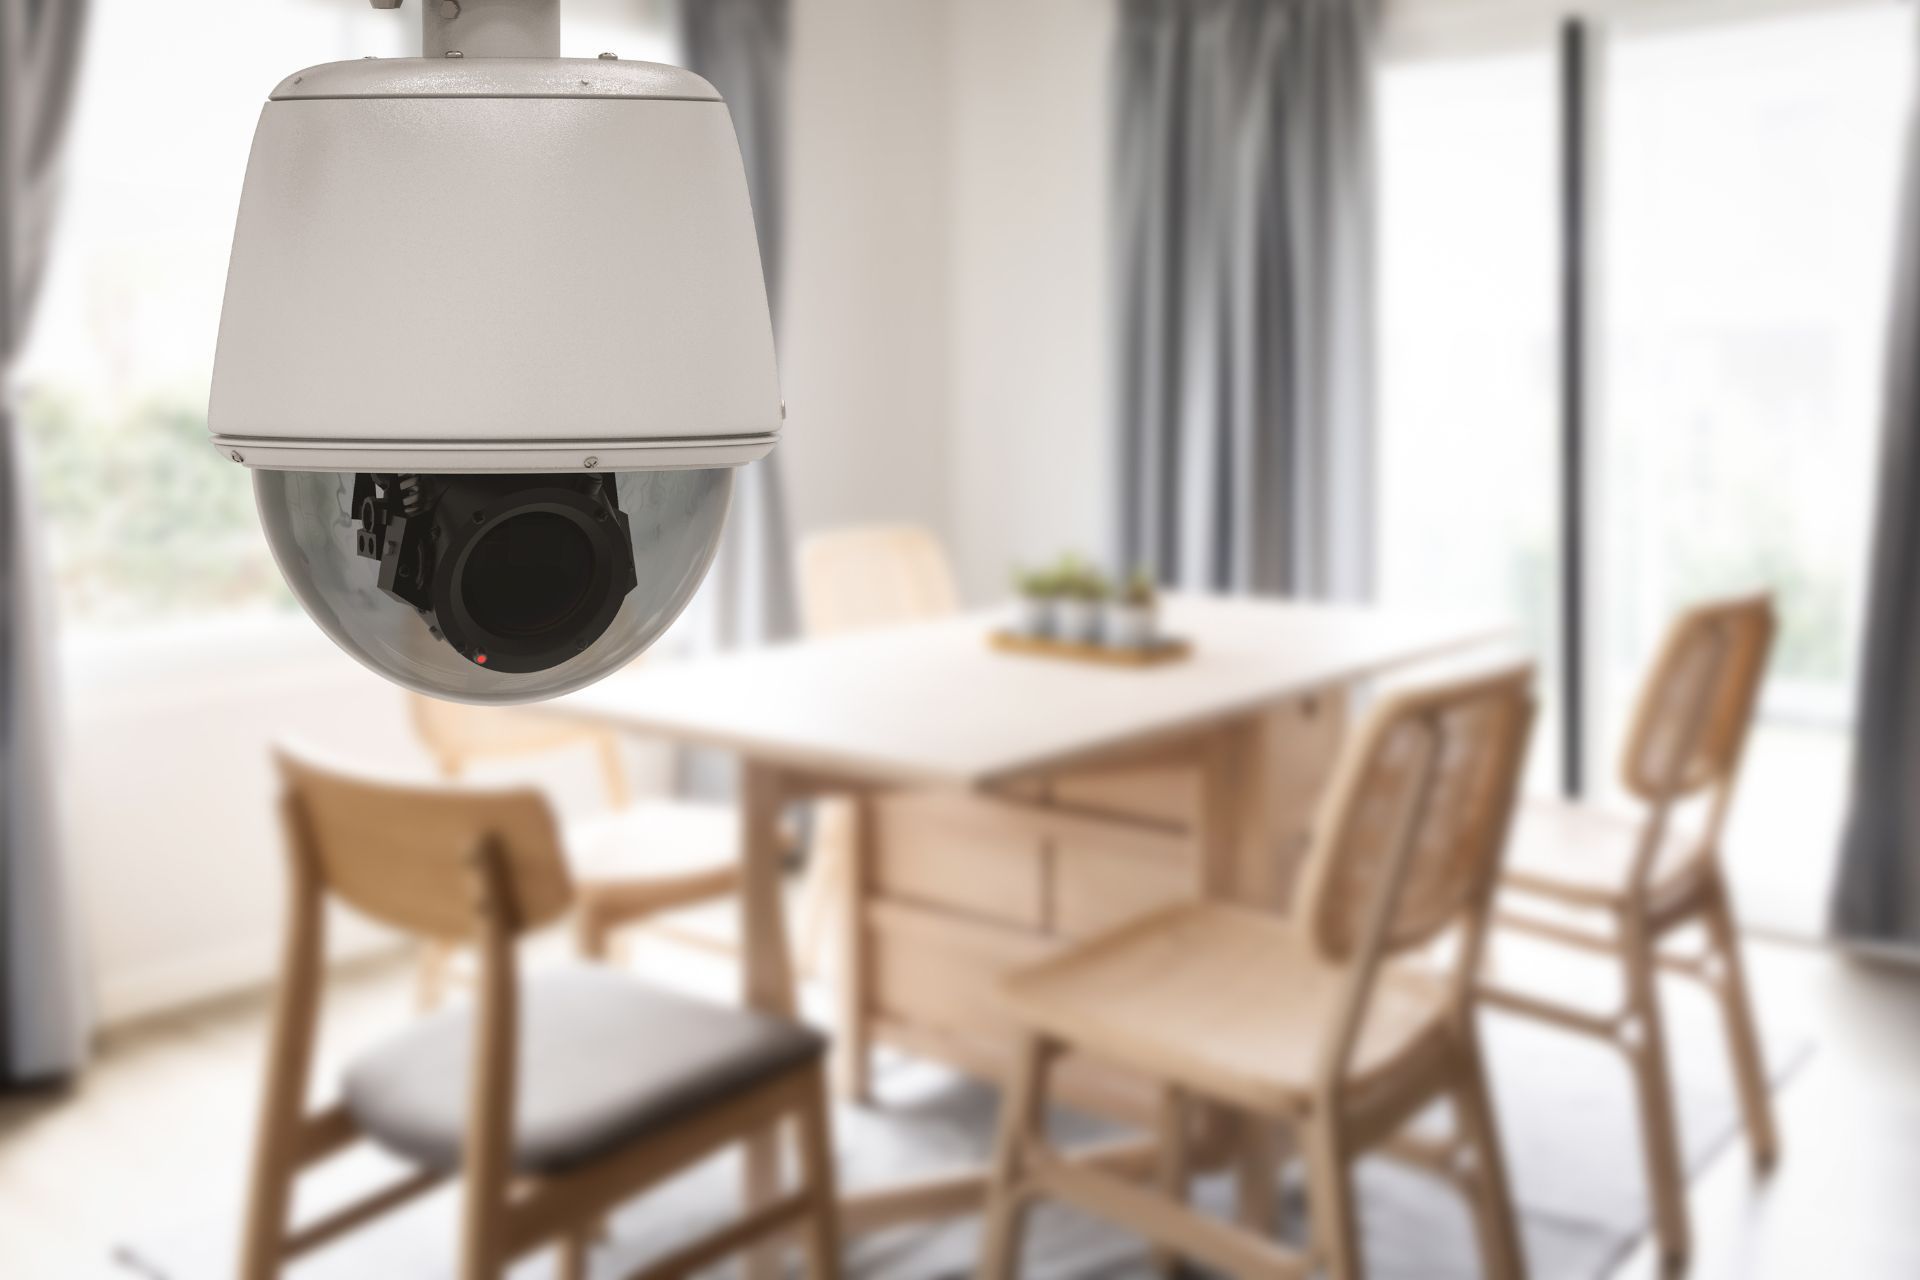 An indoor security camera installed within the dining room of a home